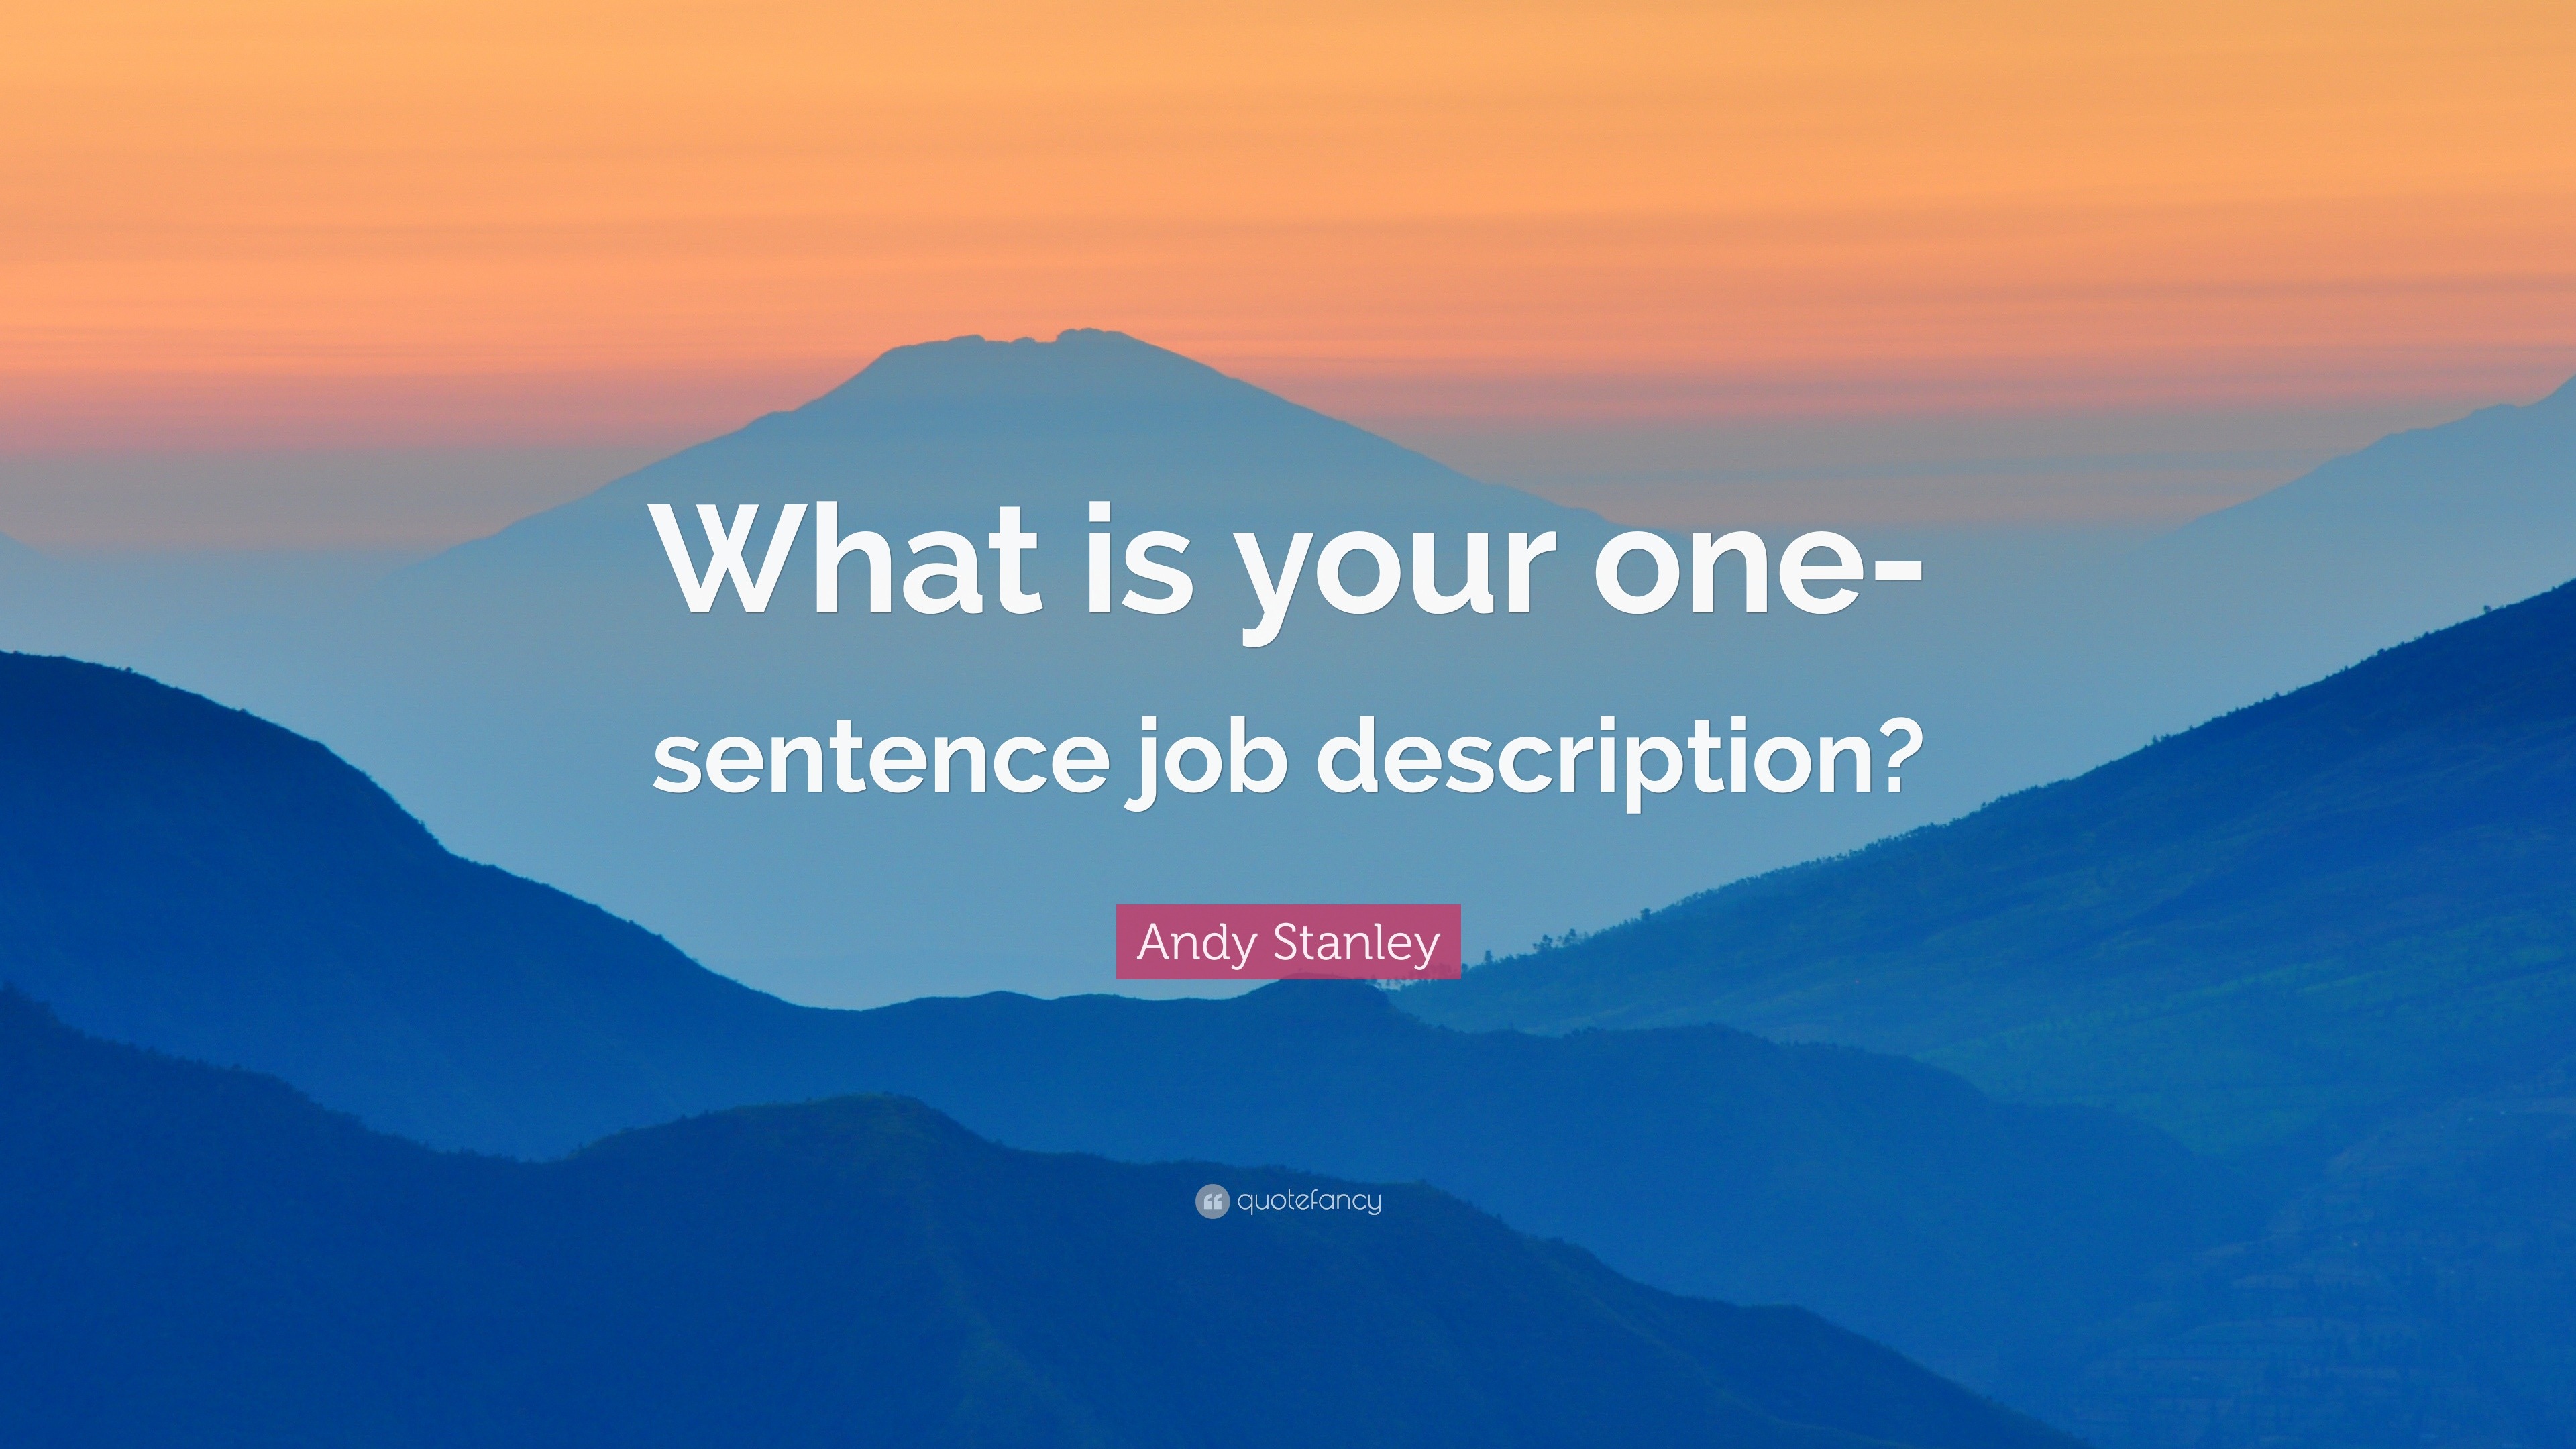 andy-stanley-quote-what-is-your-one-sentence-job-description